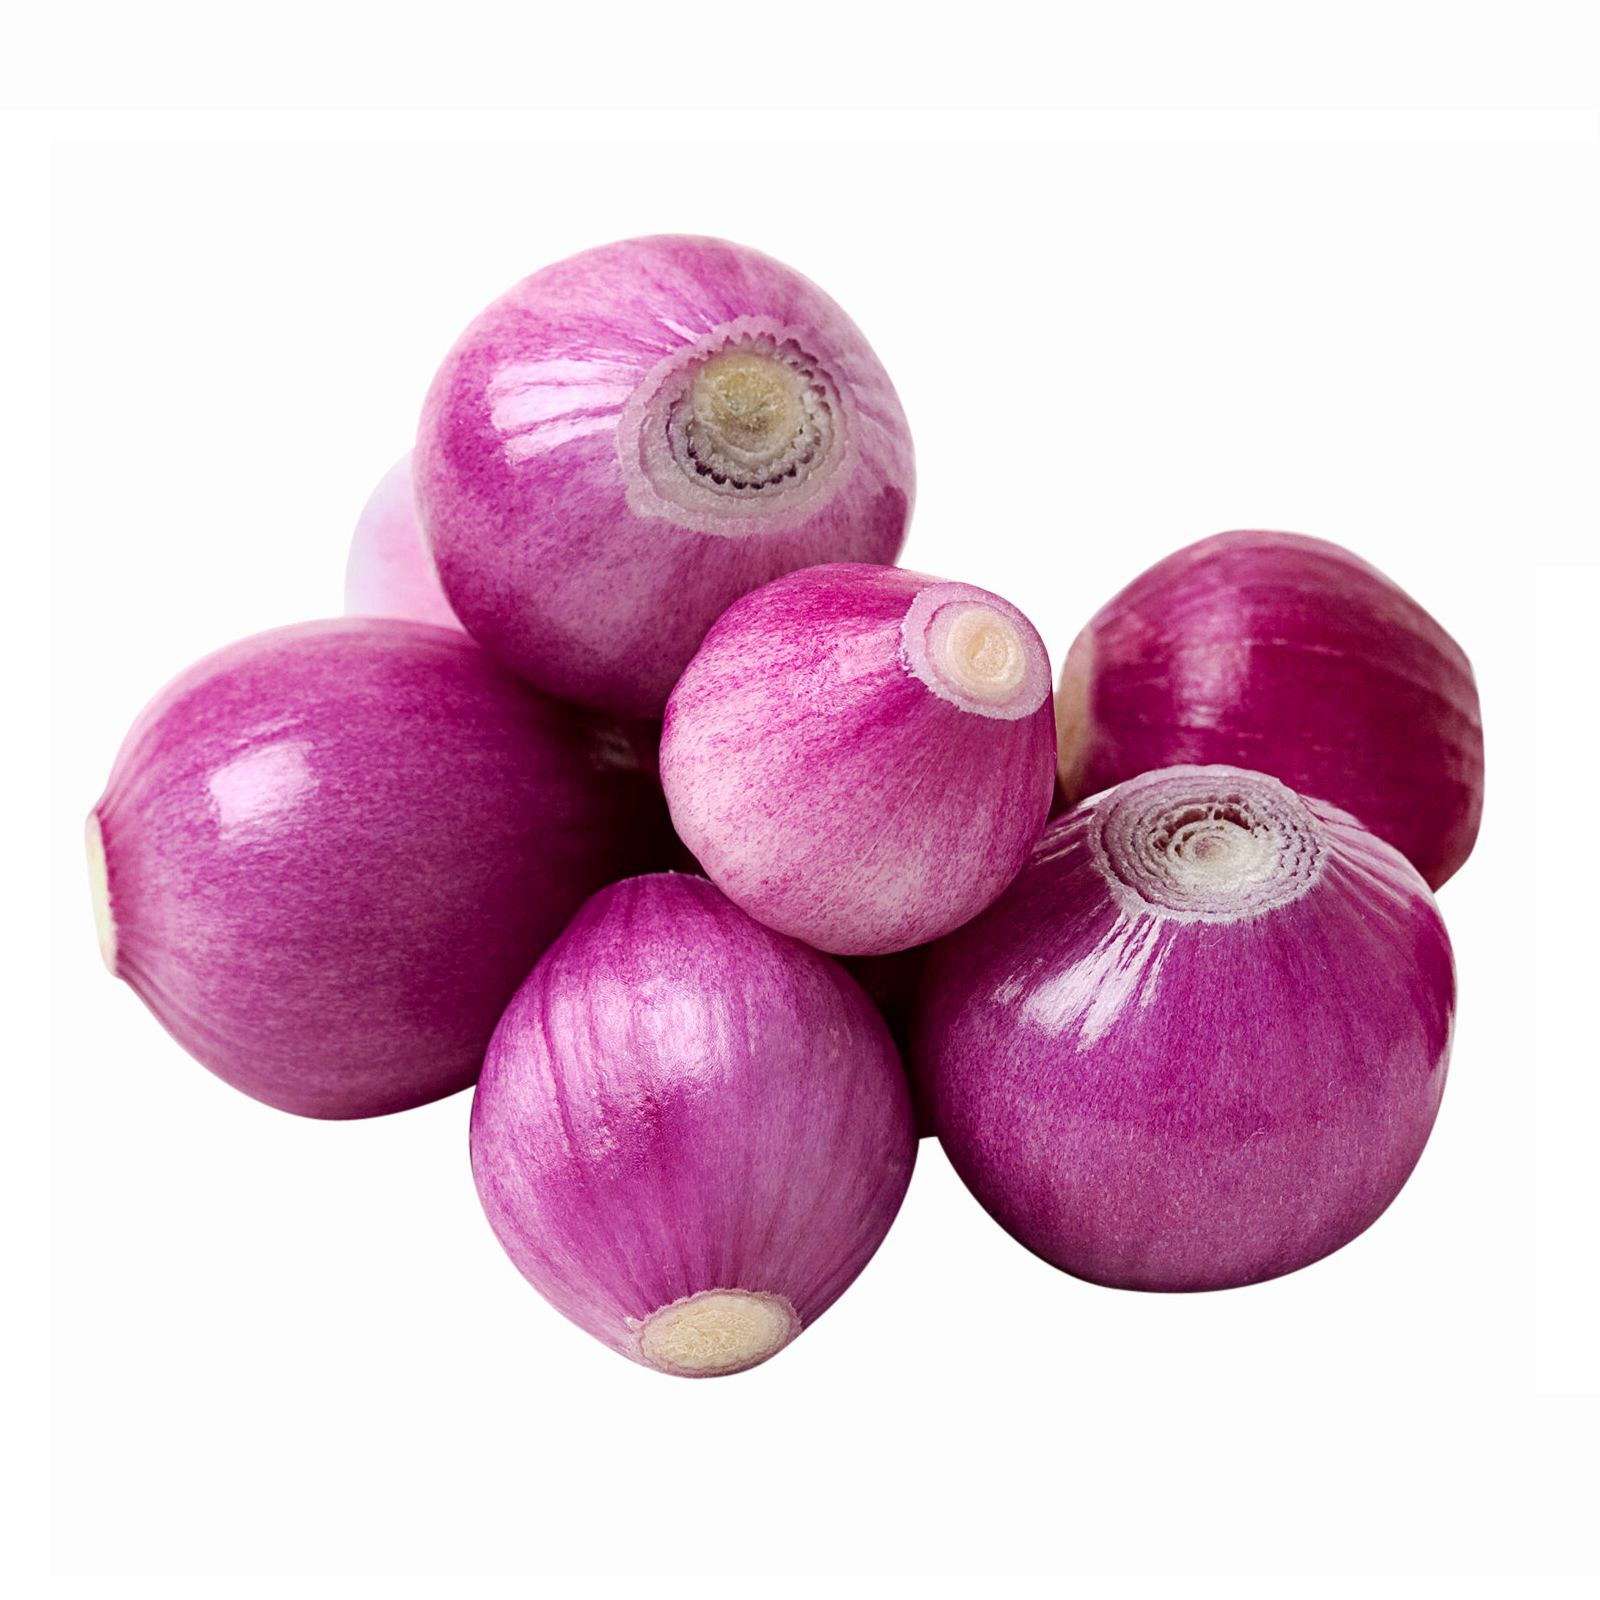 cluster of shallots 28828933 PNG